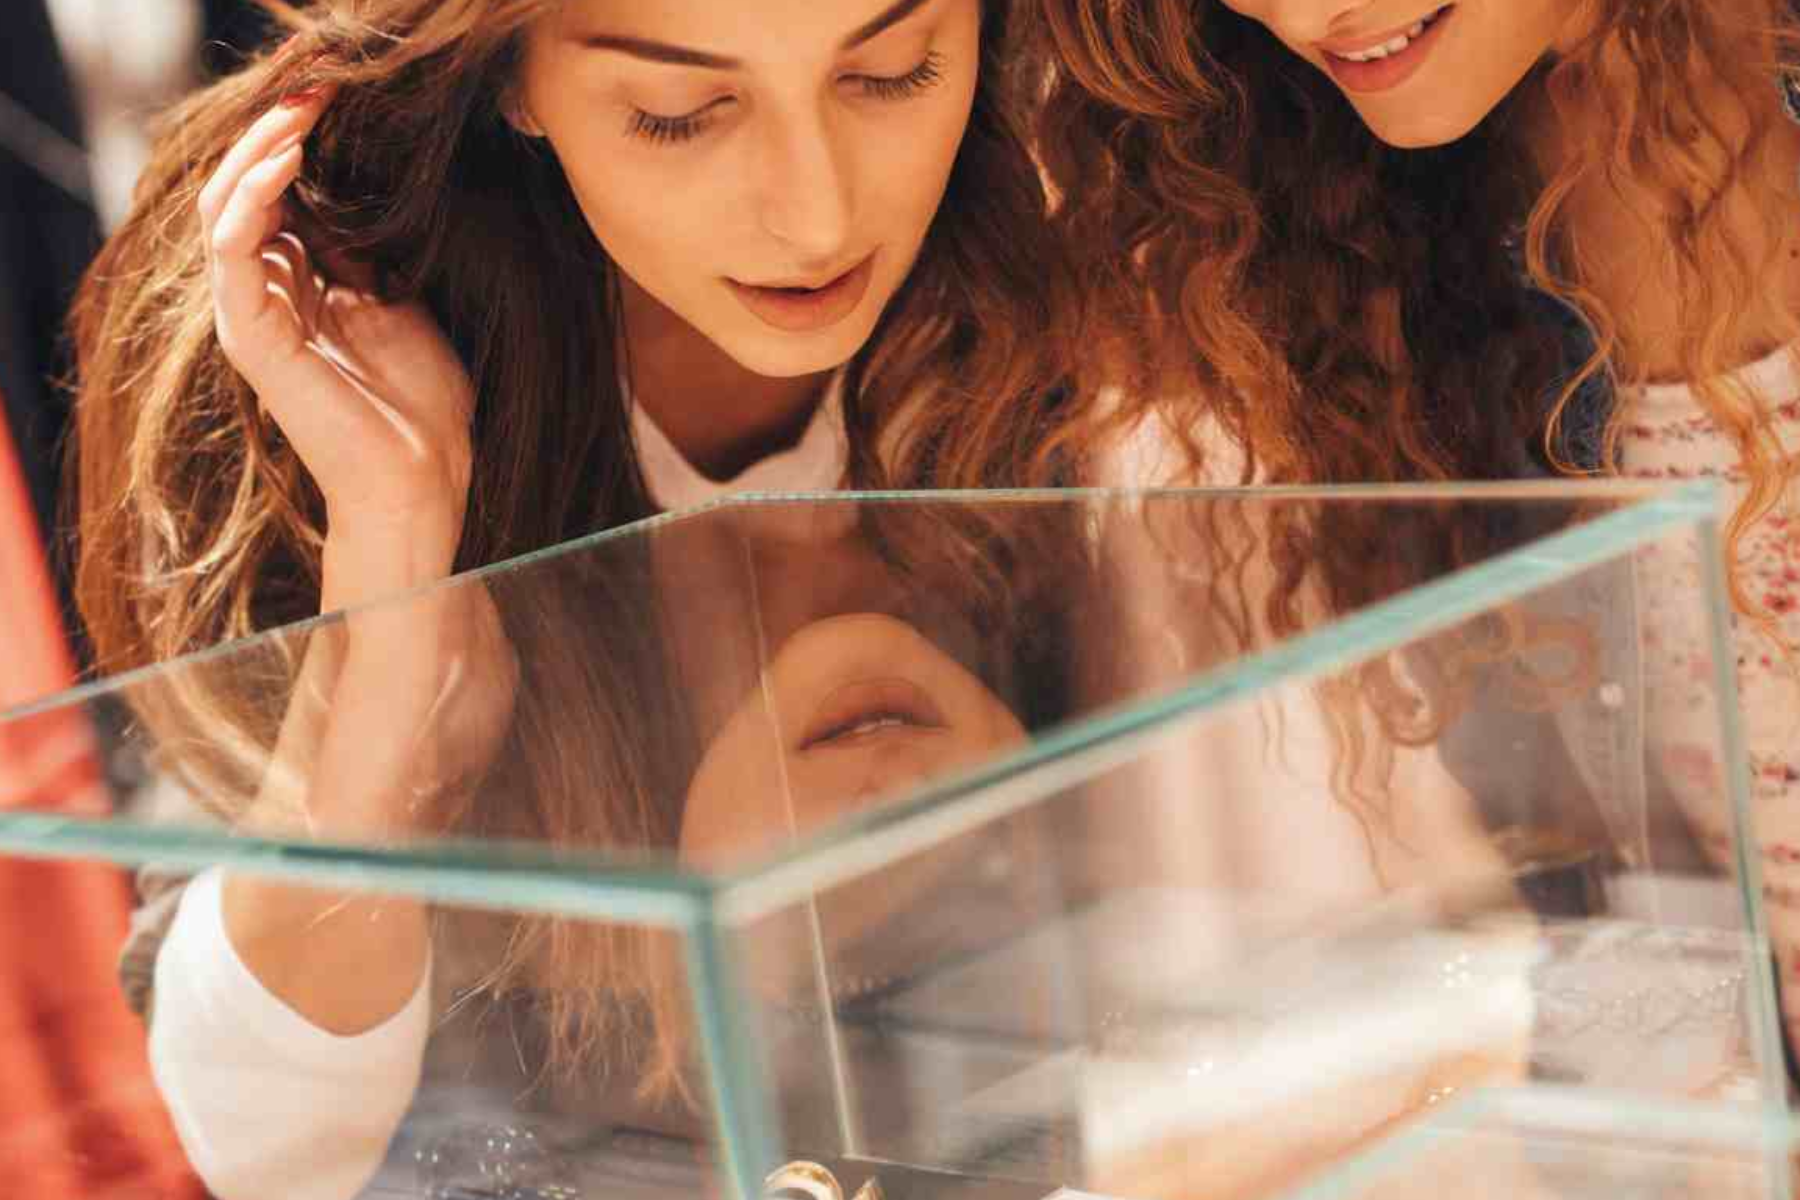 Inside the jewelry glass box, two women select a piece of jewelry